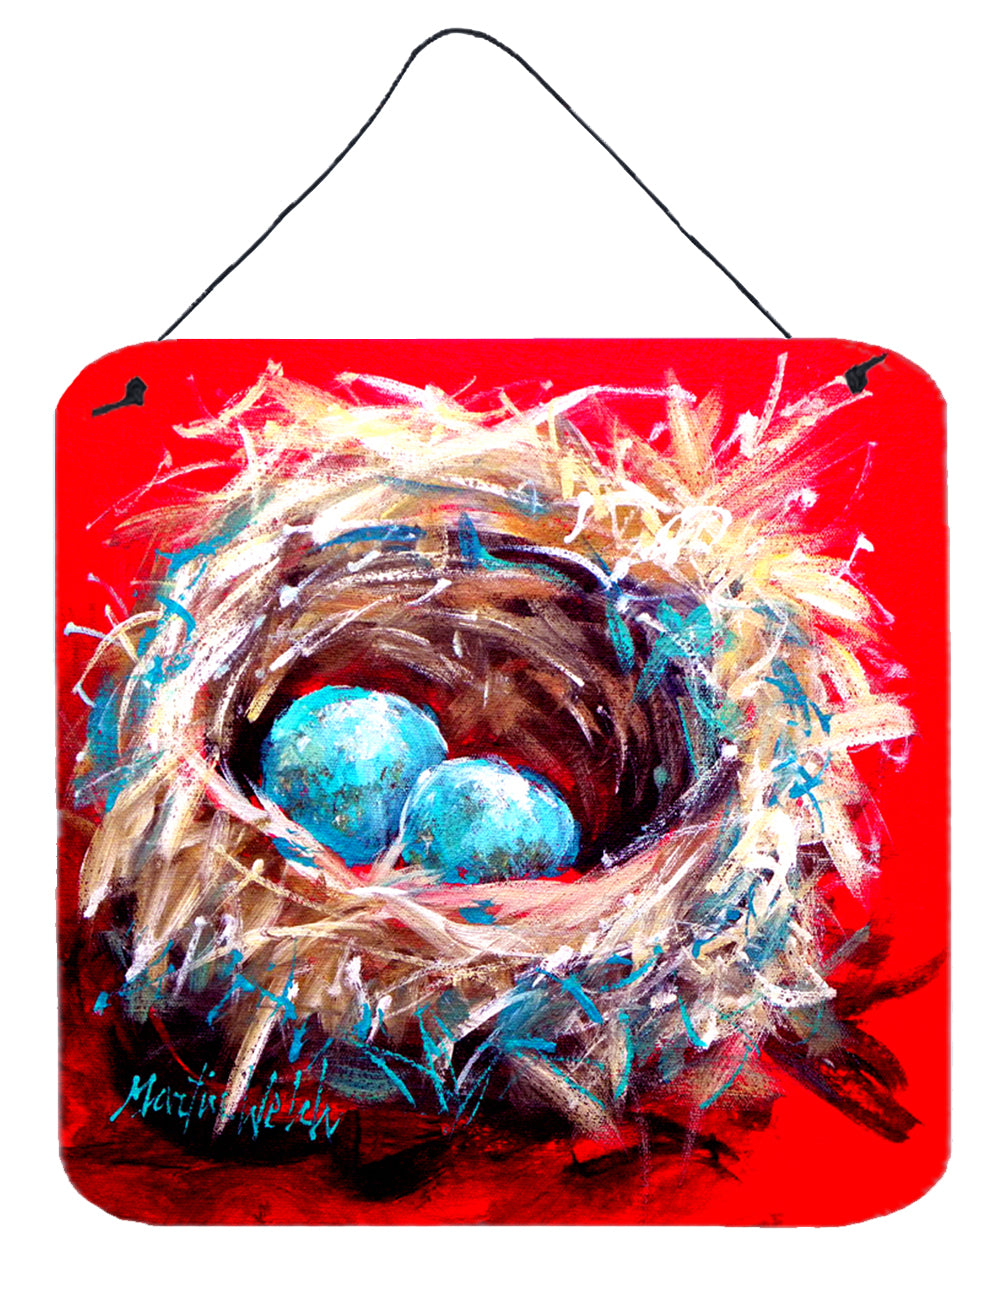 Buy this Bird Egg-Stra Speical Wall or Door Hanging Prints